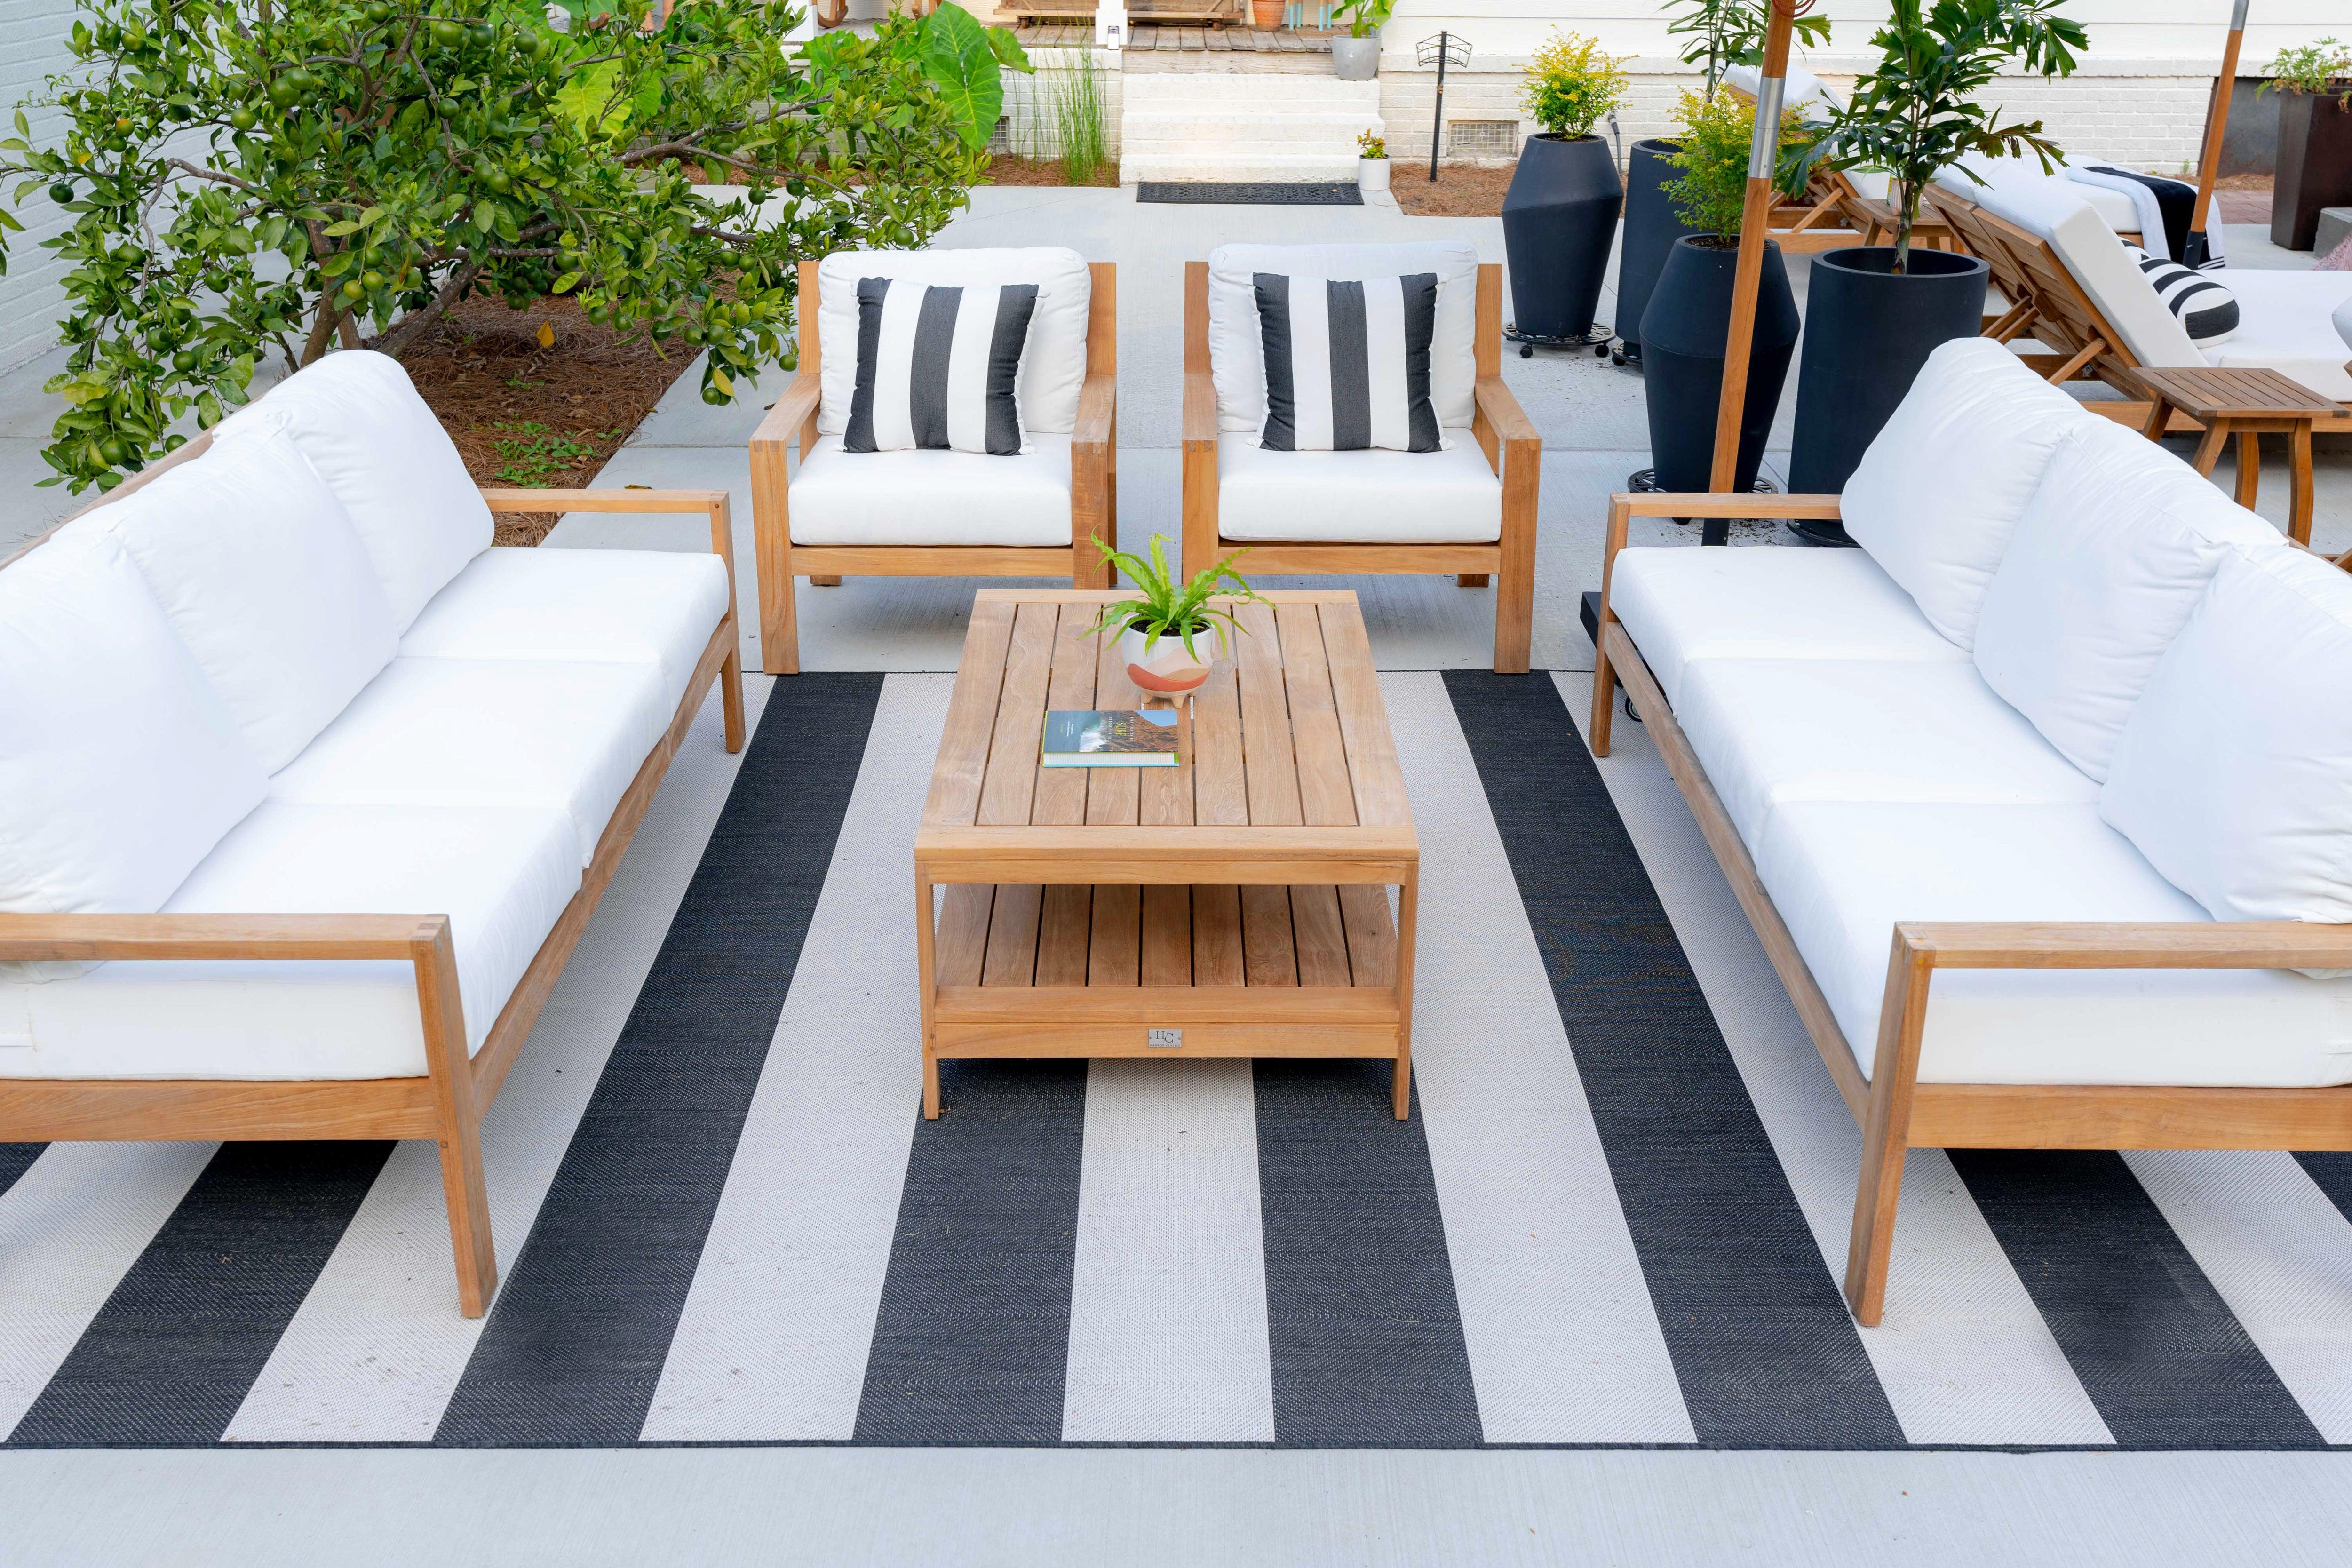 What To Do With Patio Furniture in The Winter